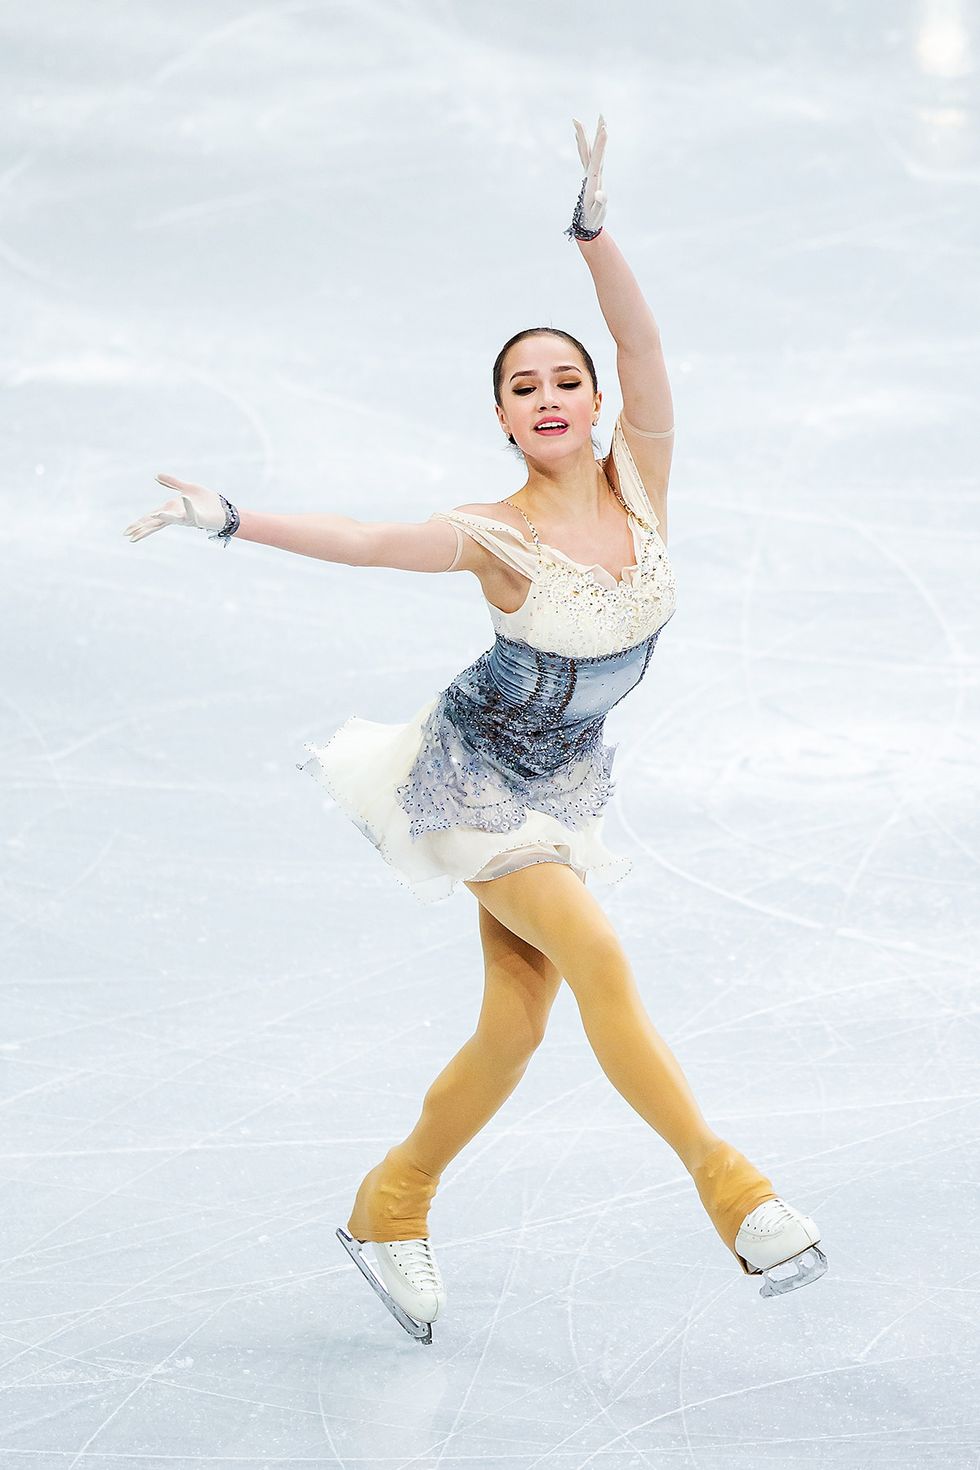 Figure skate, Figure skating, Ice skating, Skating, Ice dancing, Jumping, Ice skate, Recreation, Ice rink, Individual sports, 